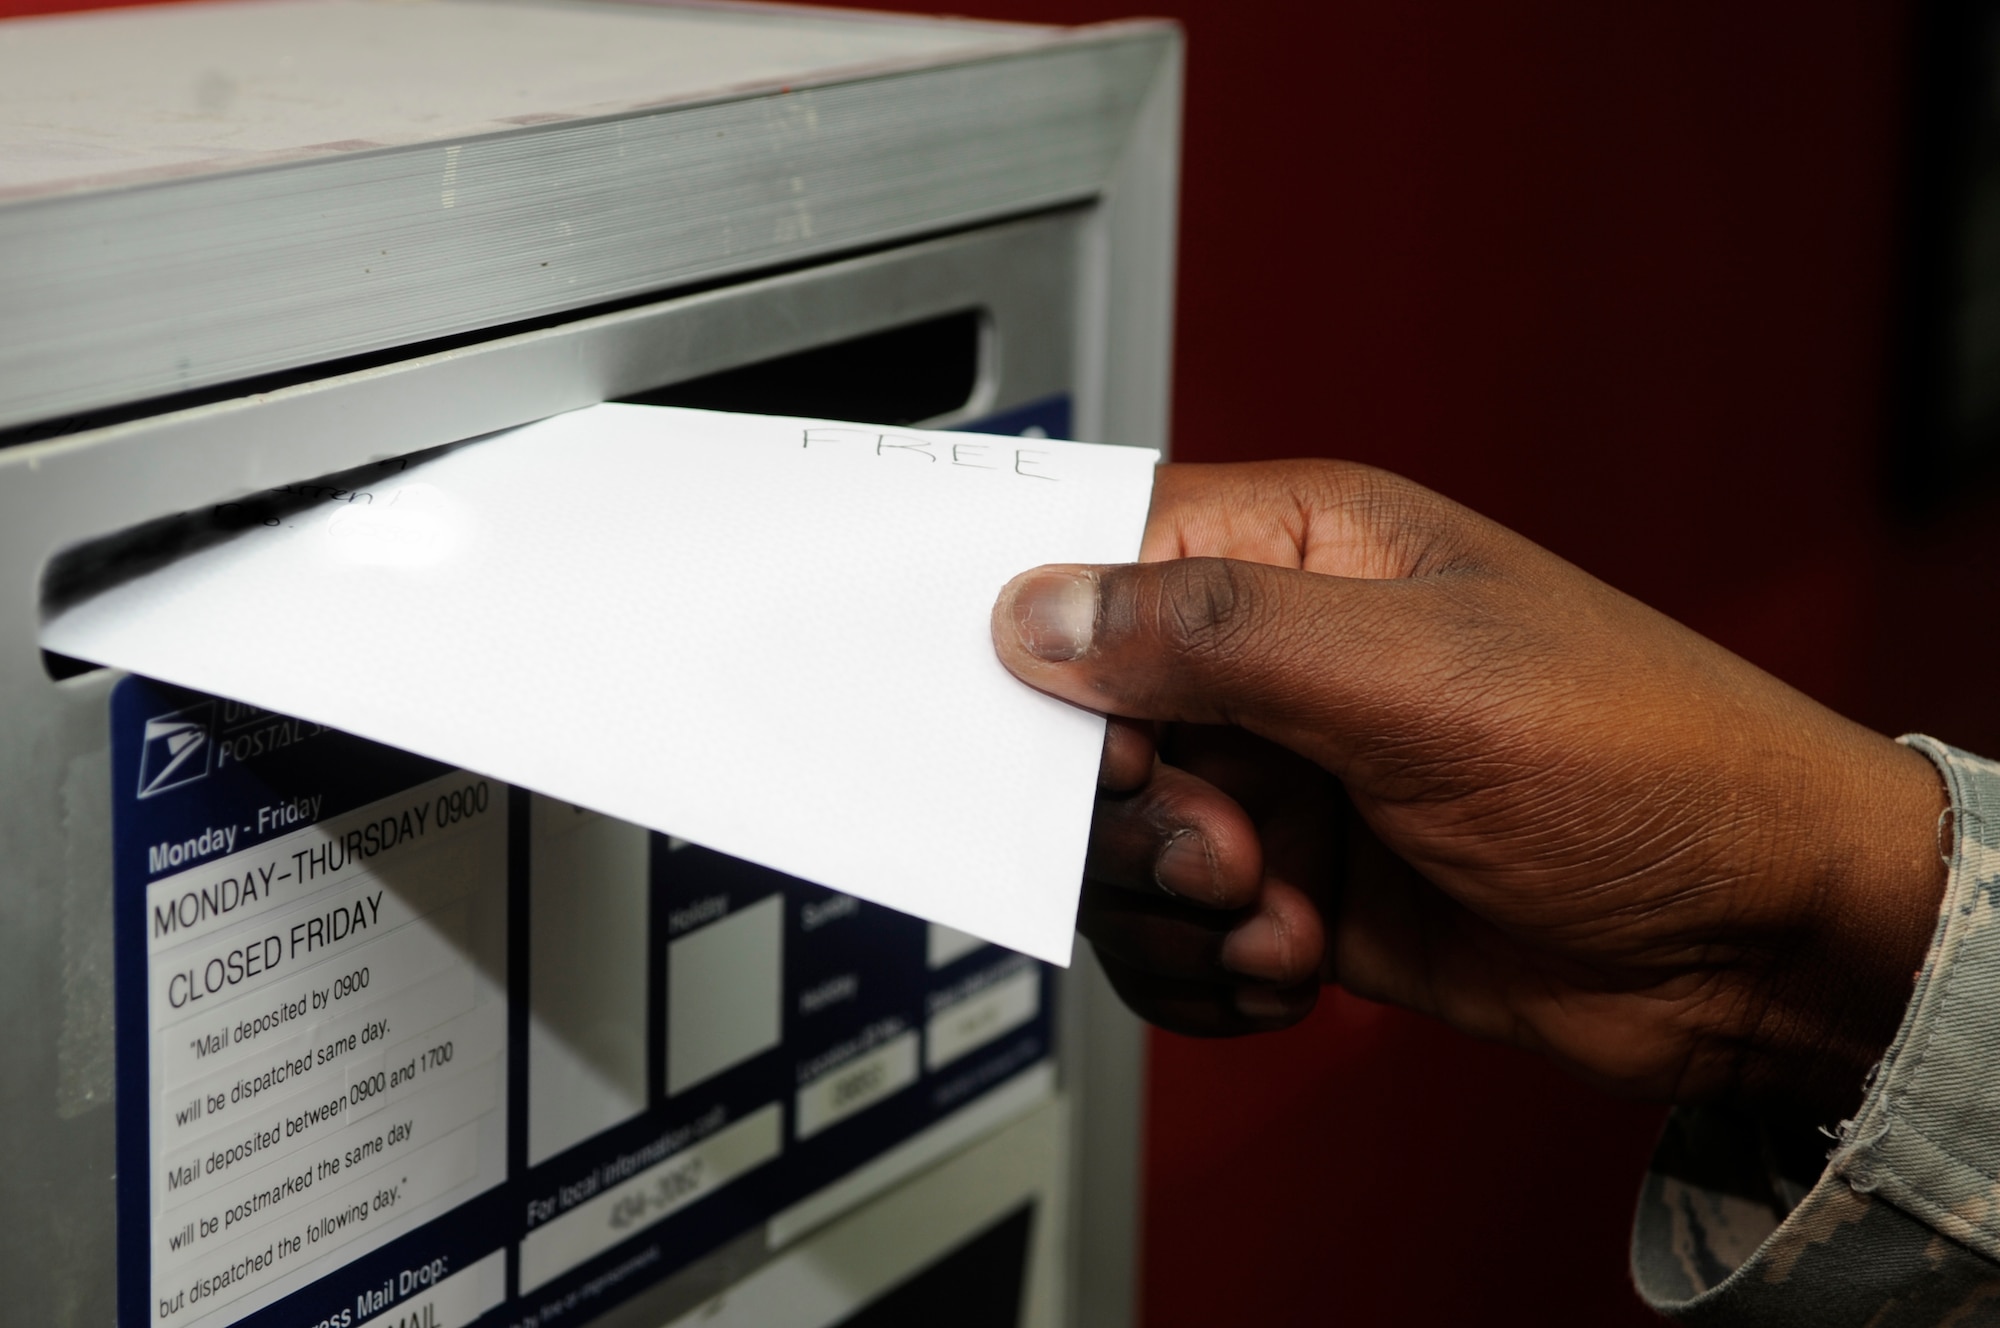 SOUTHWEST ASIA – Senior Airman Kenneth White, 380th Expeditionary Force Support Squadron, puts a letter with “FREE” written on it in a post office receptacle Nov. 12, 2009. Members of the 380th Air Expeditionary Wing are authorized to send free mail as of Nov. 10, 2009. Airman White is deployed from the 172nd Airlift Wing, Mississippi Air National Guard Wing, Jackson, Miss., and calls Hattiesburg, Miss., home. (U.S. Air Force photo/Senior Airman Stephen Linch)